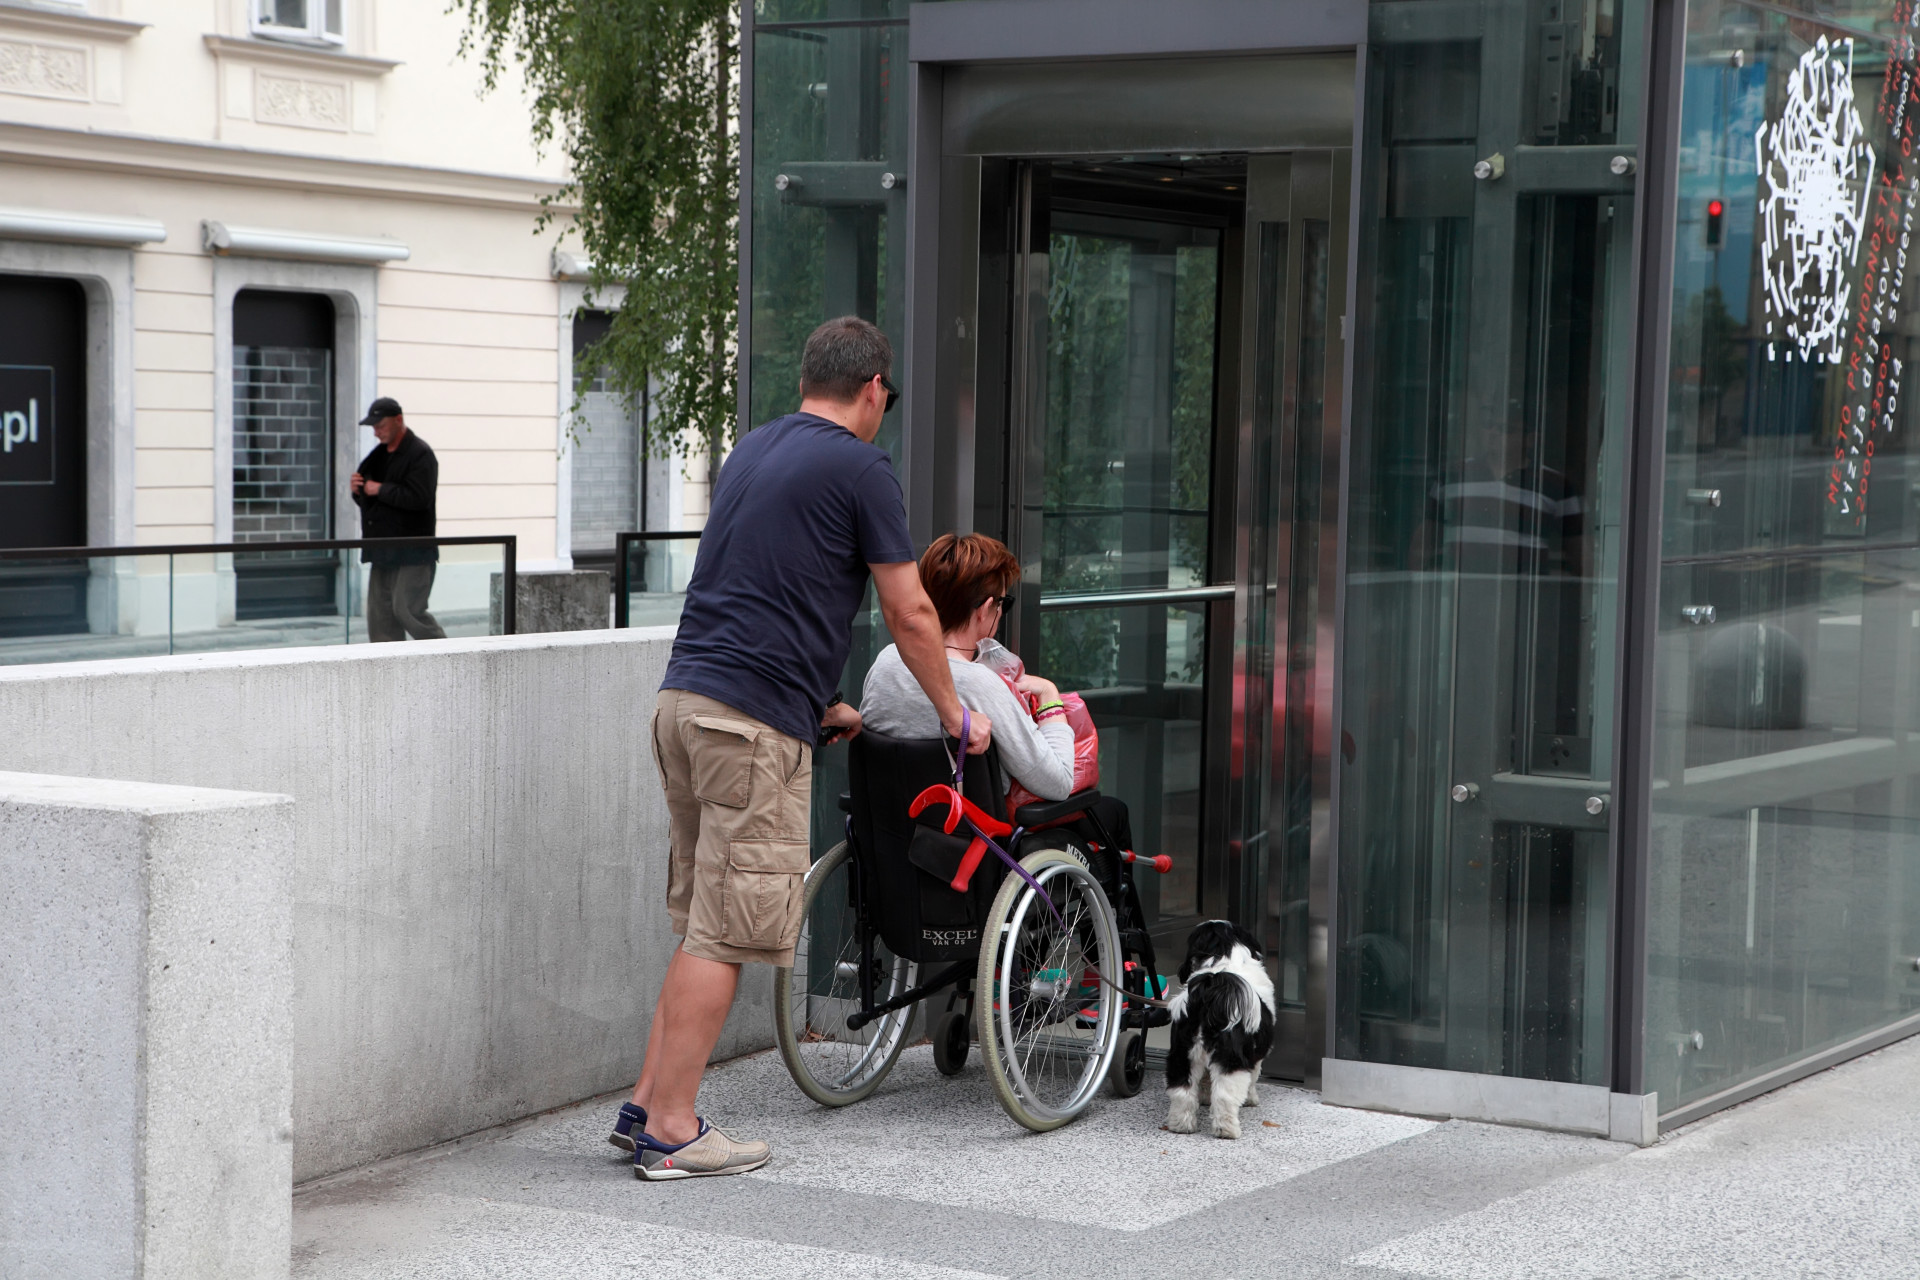 Elevators to help wheelchair users can be found around the city.<p>You may also like:<a href="https://www.starsinsider.com/n/362370?utm_source=msn.com&utm_medium=display&utm_campaign=referral_description&utm_content=550448en-us"> Ridiculously extravagant celebrity gift exchanges </a></p>